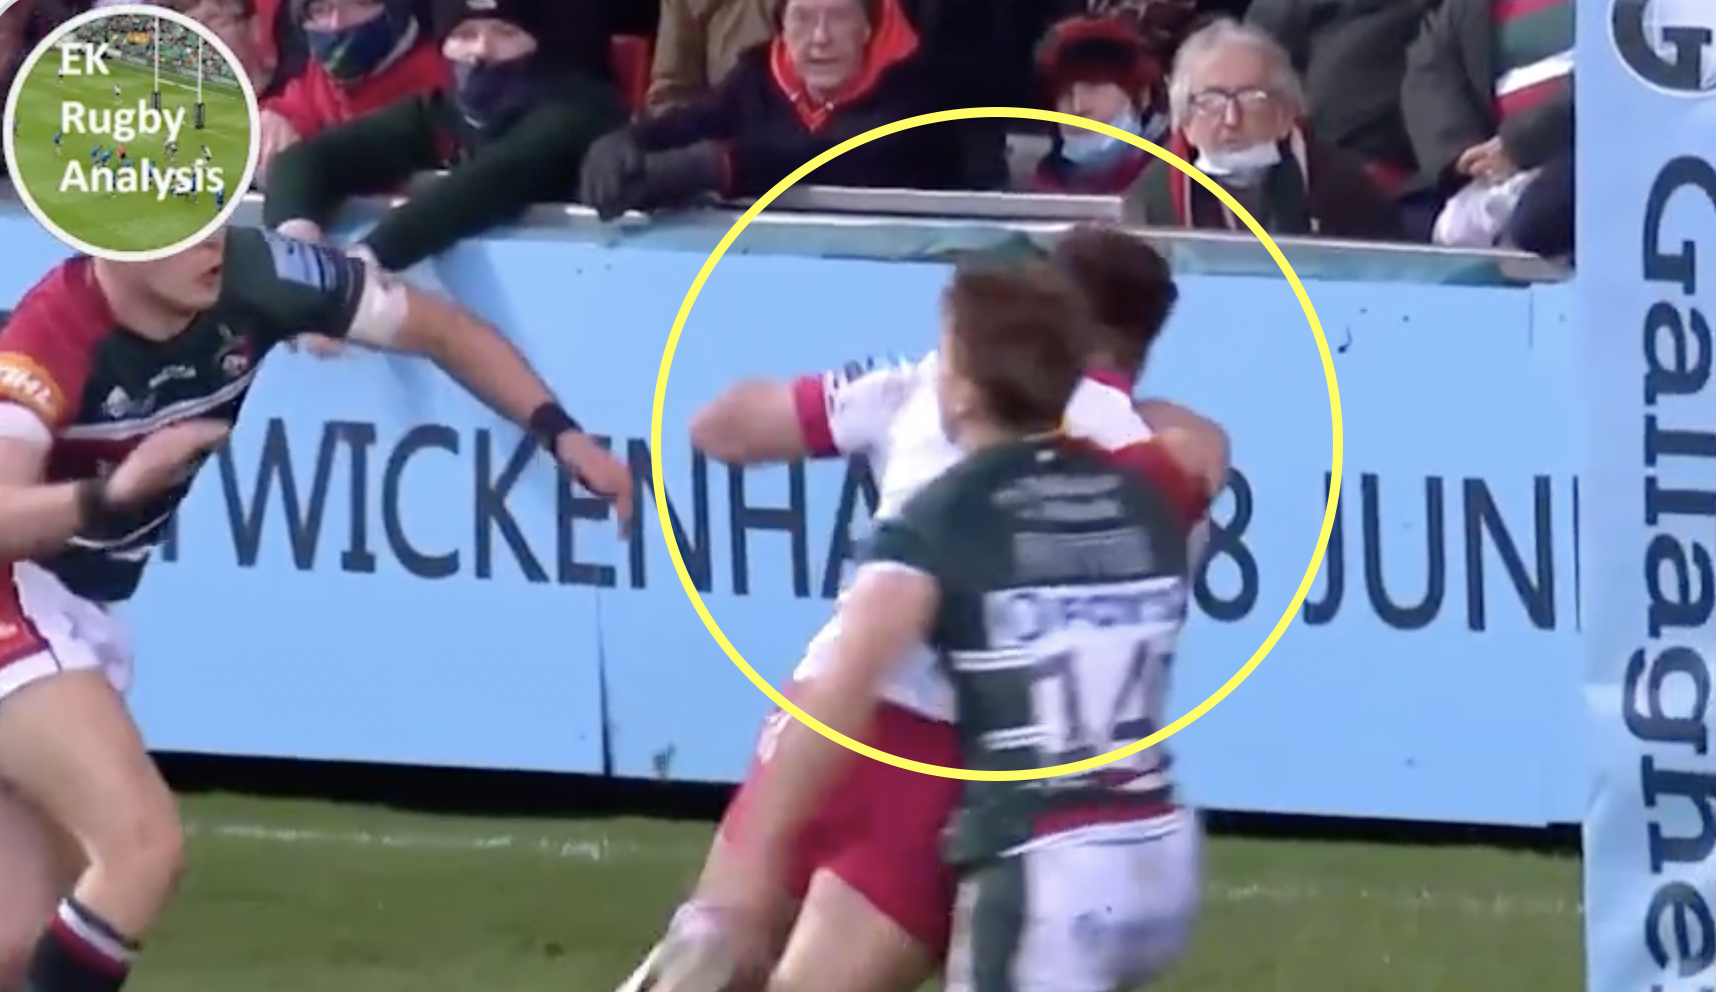 The law tweak that would have left Quins fans raging against Leicester